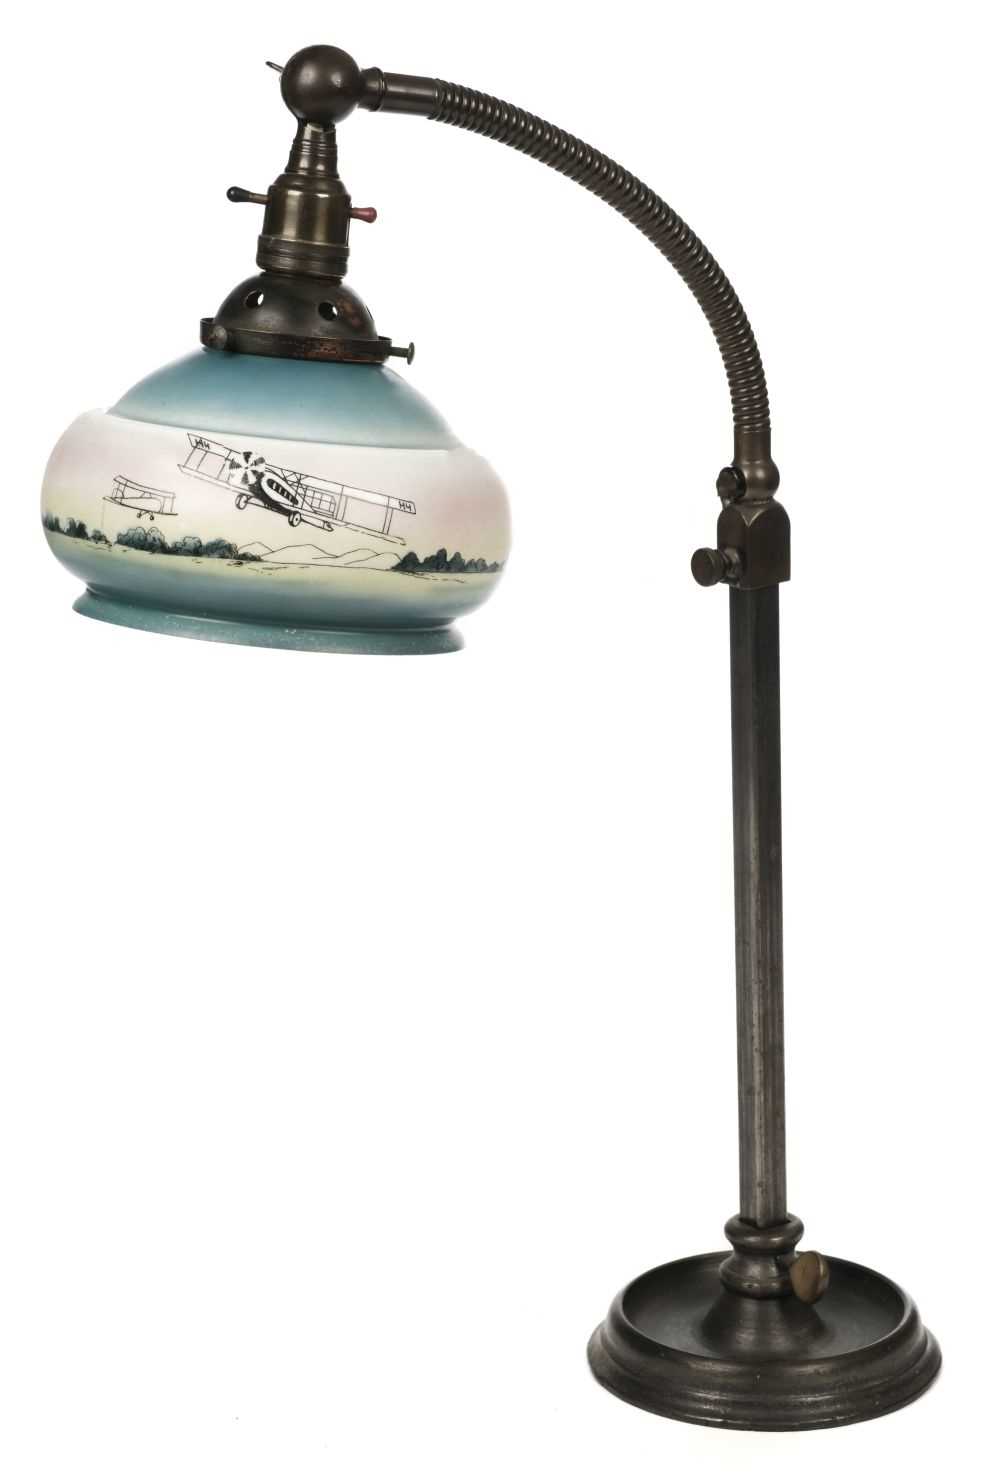 Lot 18 - Aviation Table Lamp. An early 20th-century Electric Desk-lamp, c. 1920s